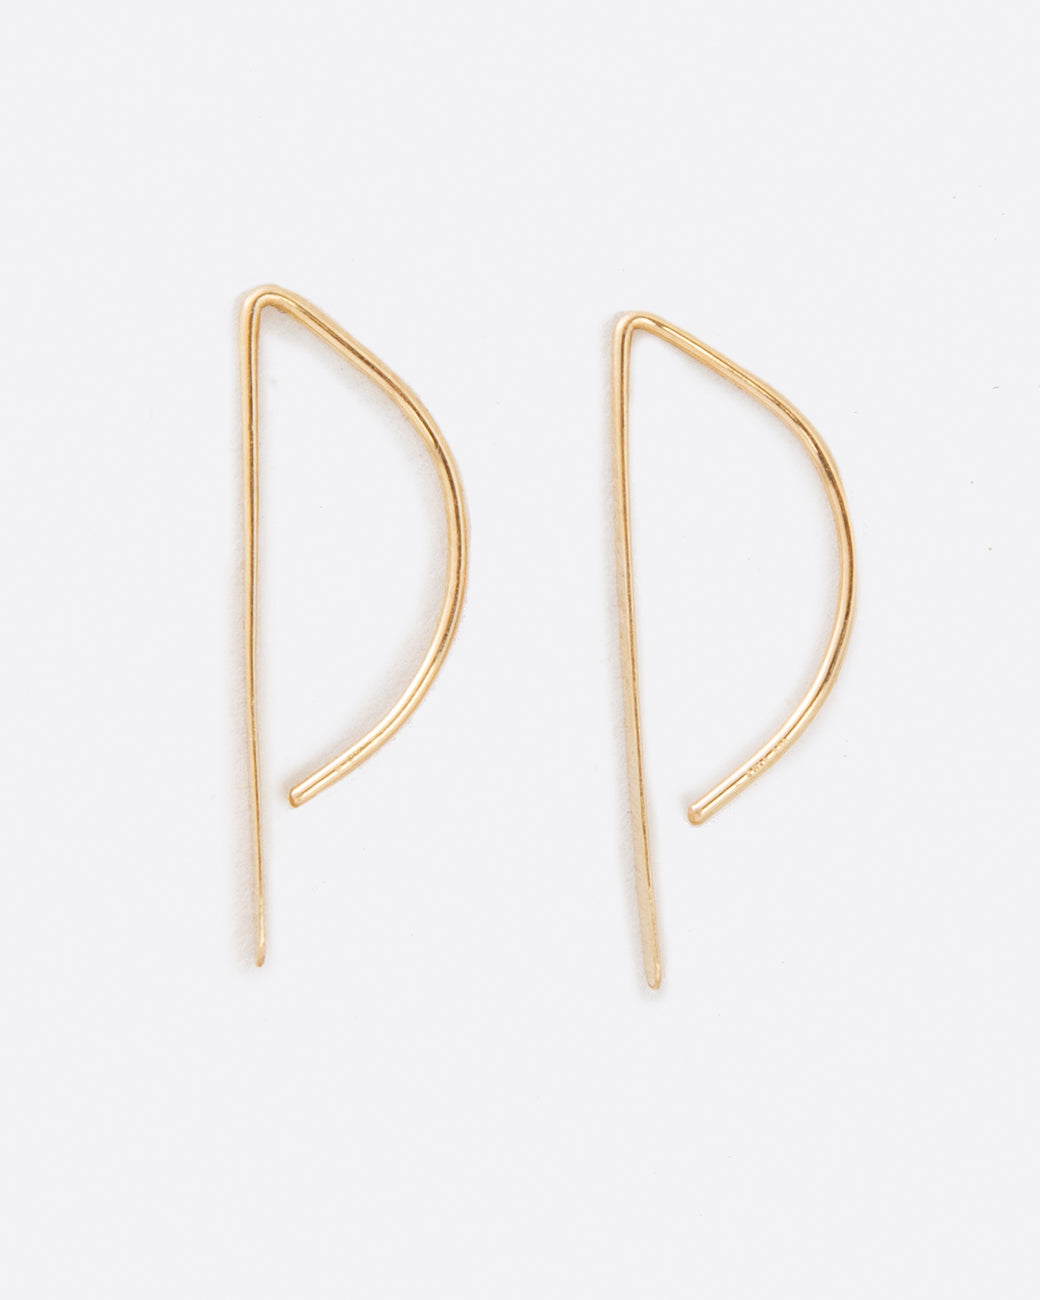 An unusual take on a hoop earring with a flat edge that catches the light.